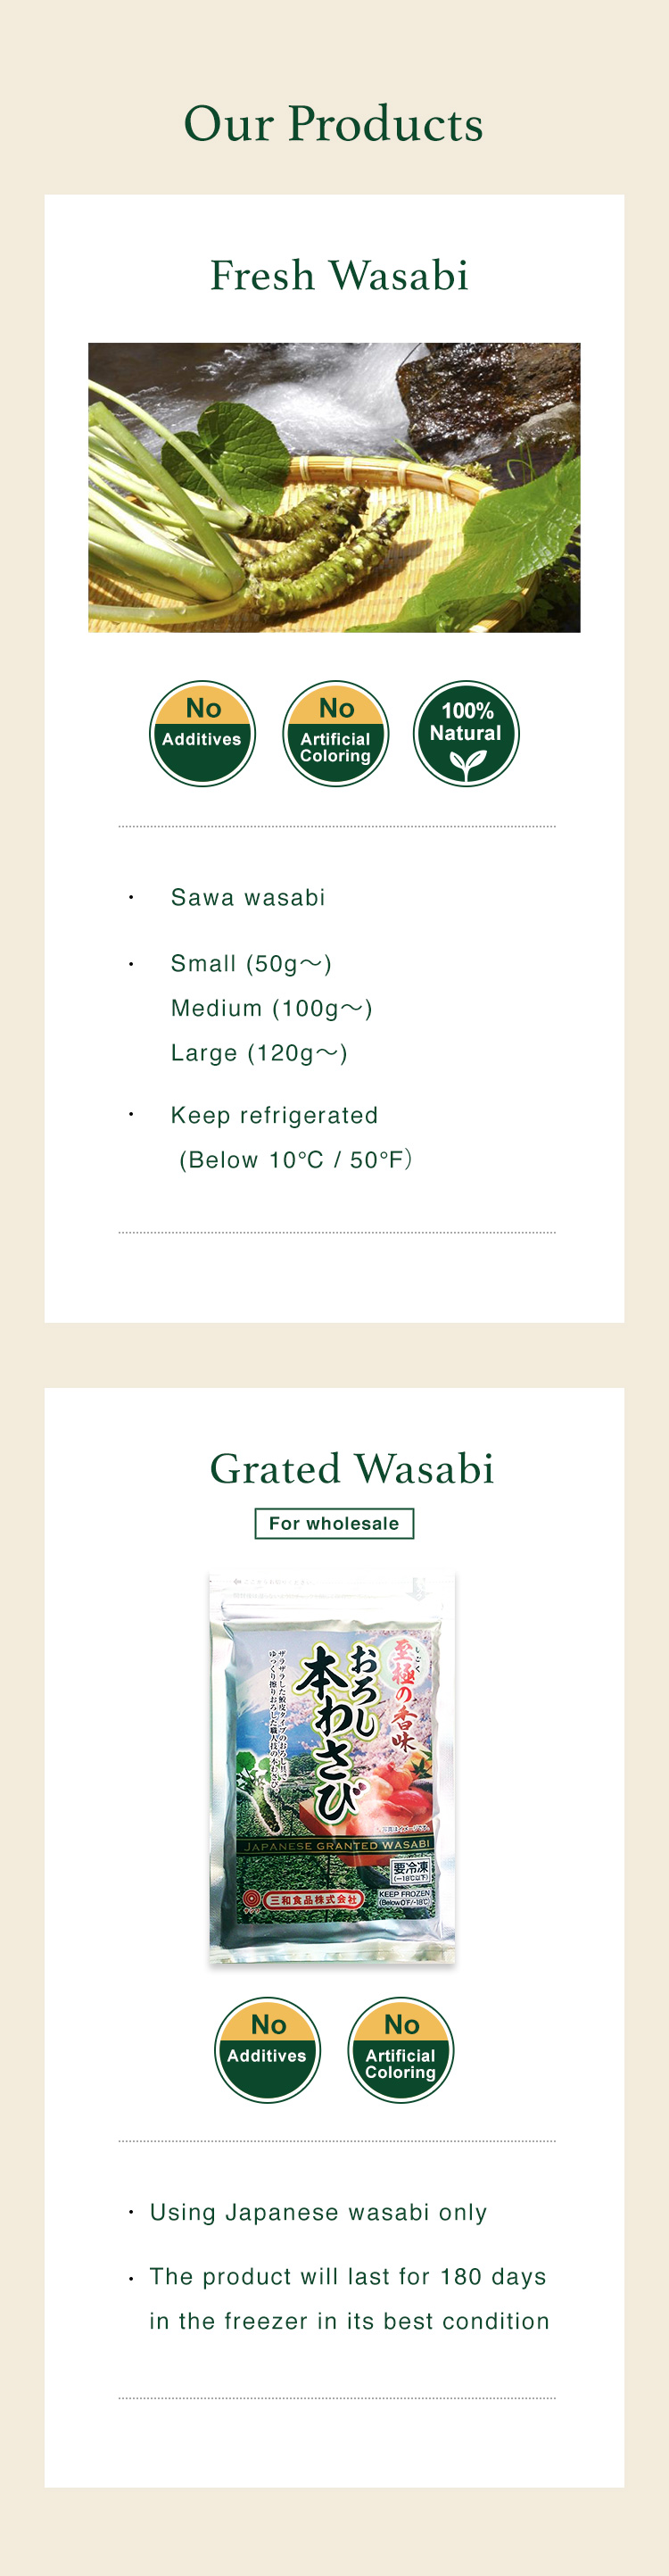 Our Products | Fresh Wasabi | No Additives - No Artificial Coloring | 100% Natural | Sawa wasabi | Small (50g〜) / Medium (100g〜) / Large (120g〜) | Keep refrigerated (Below 10℃ / 50℉） | Grated Wasabi - For Wholesale | No Additives - No Artificial Coloring | Using Japanese wasabi only | The product will last for 180 days in the freezer in its best condition | Product No. AH20 200g (Pack of 5 x 6 boxes)